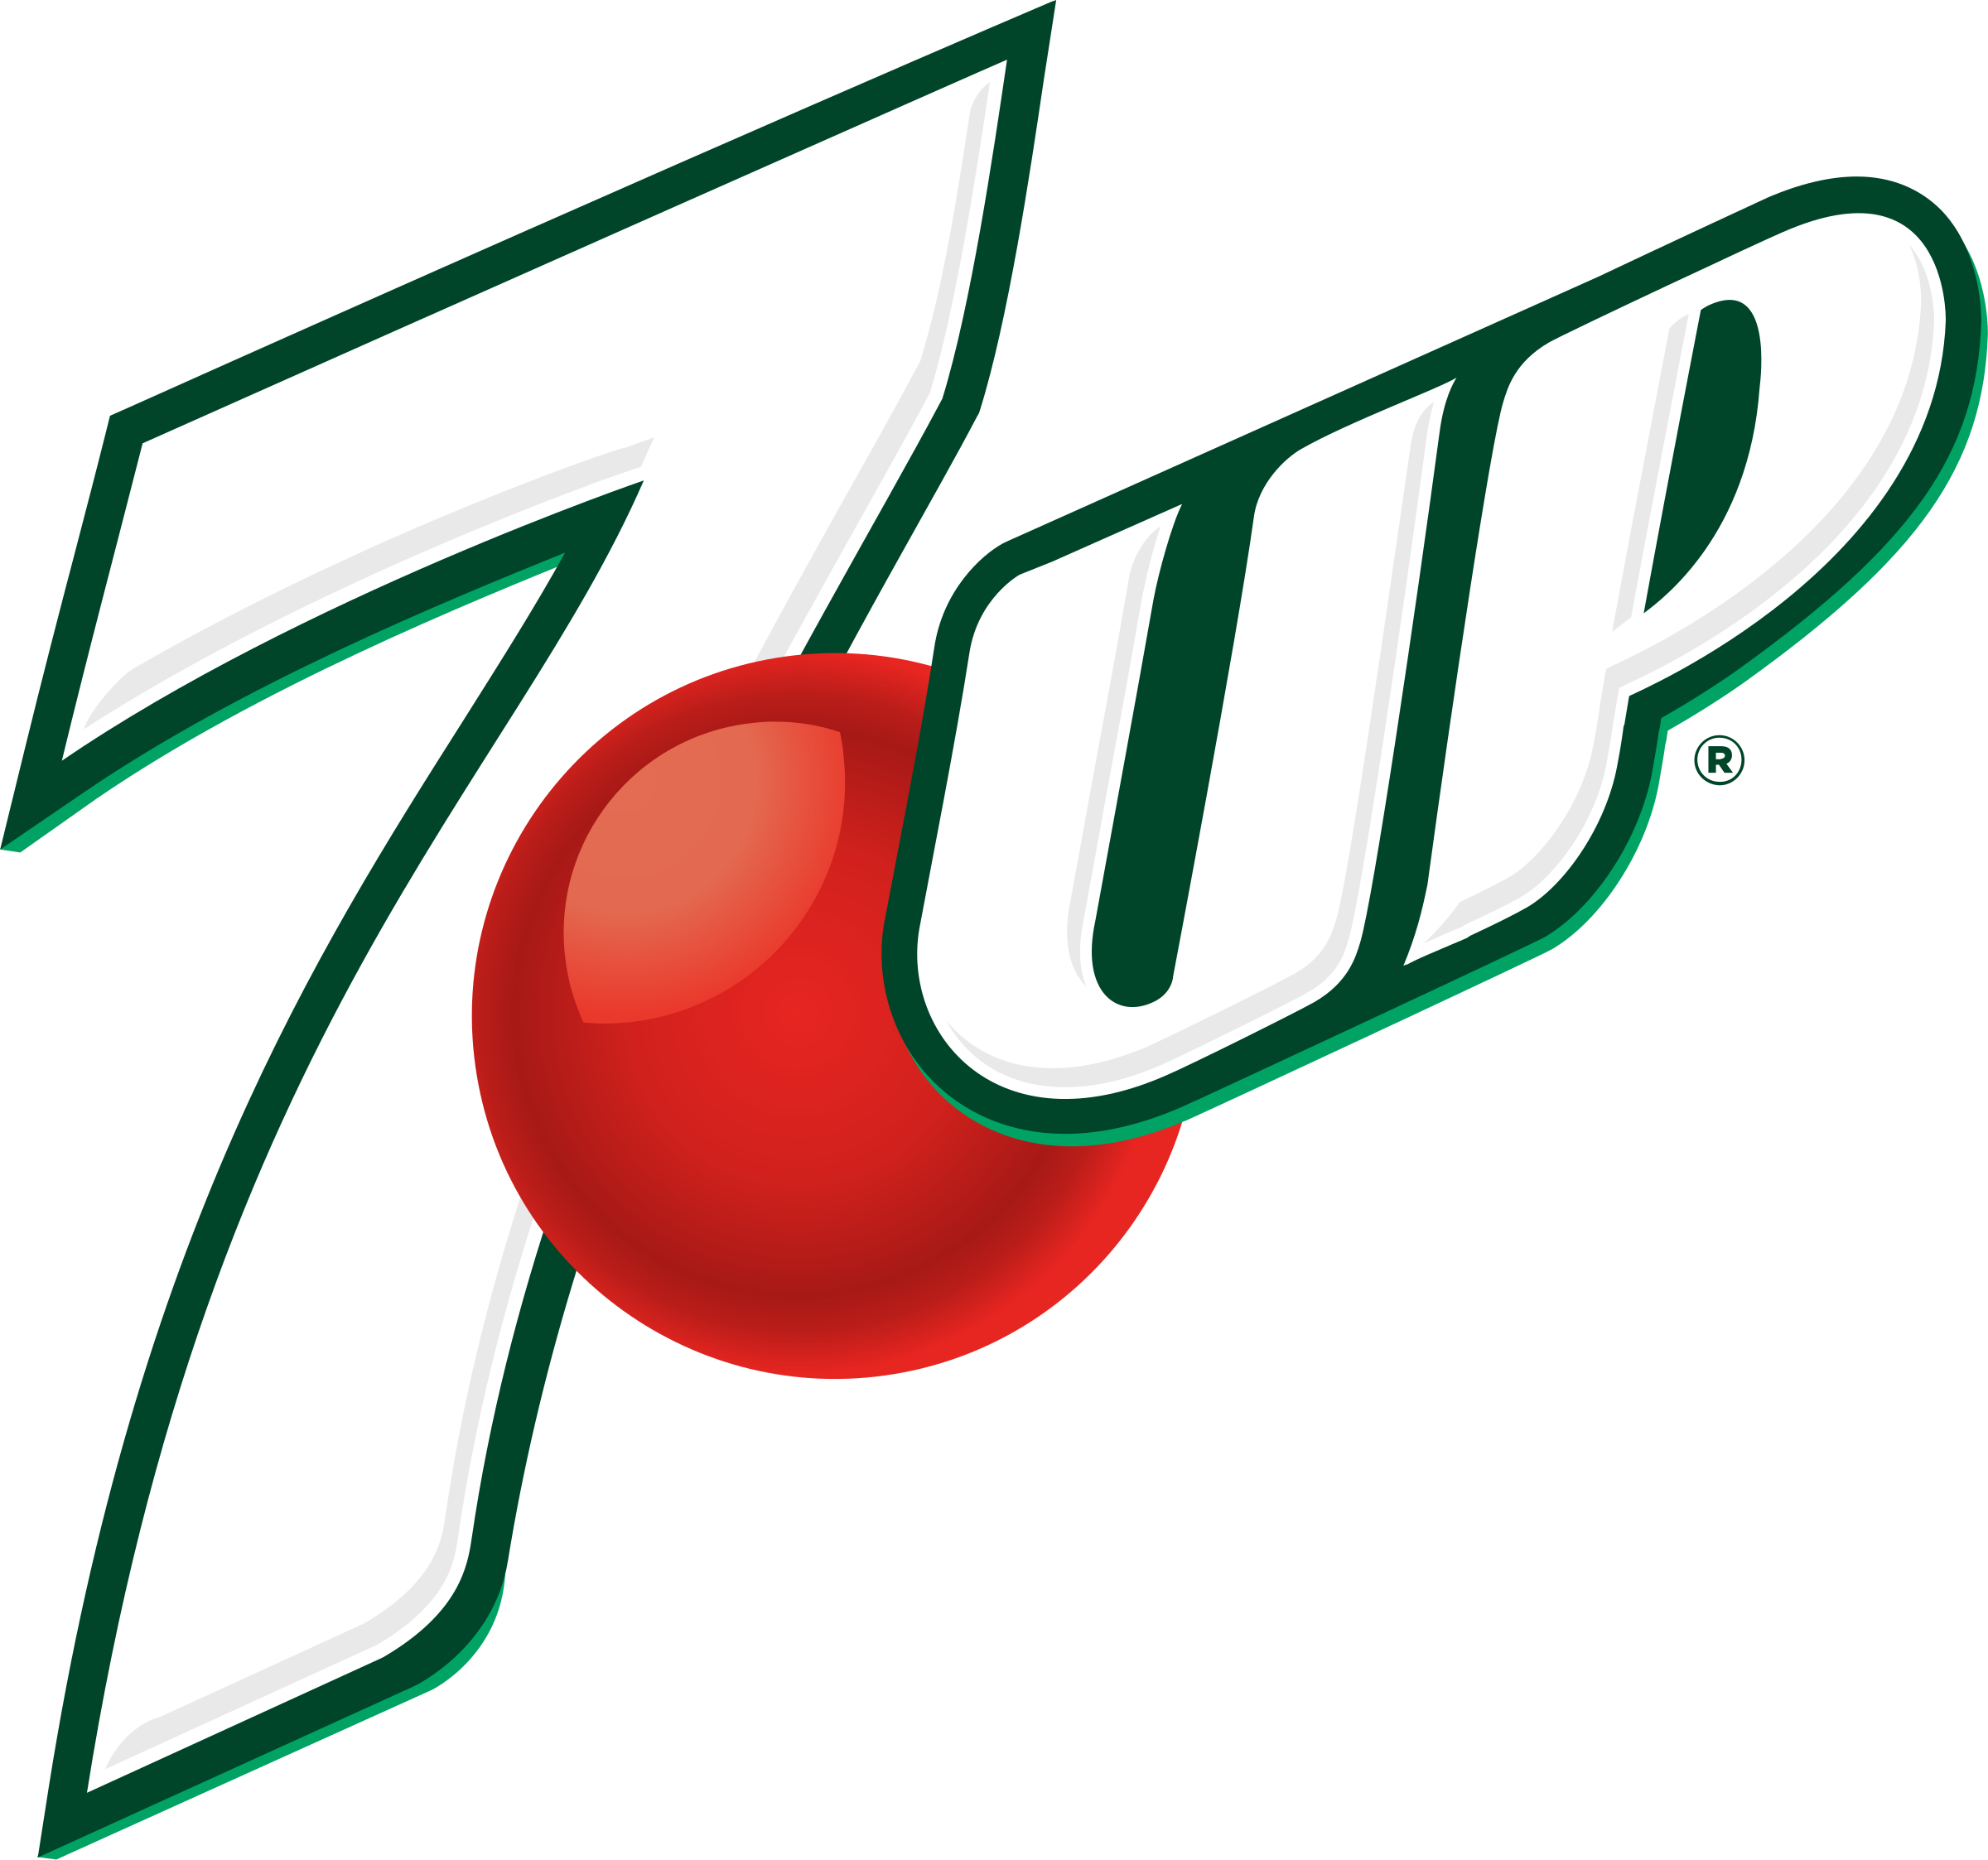 7up logo PNG Clipart